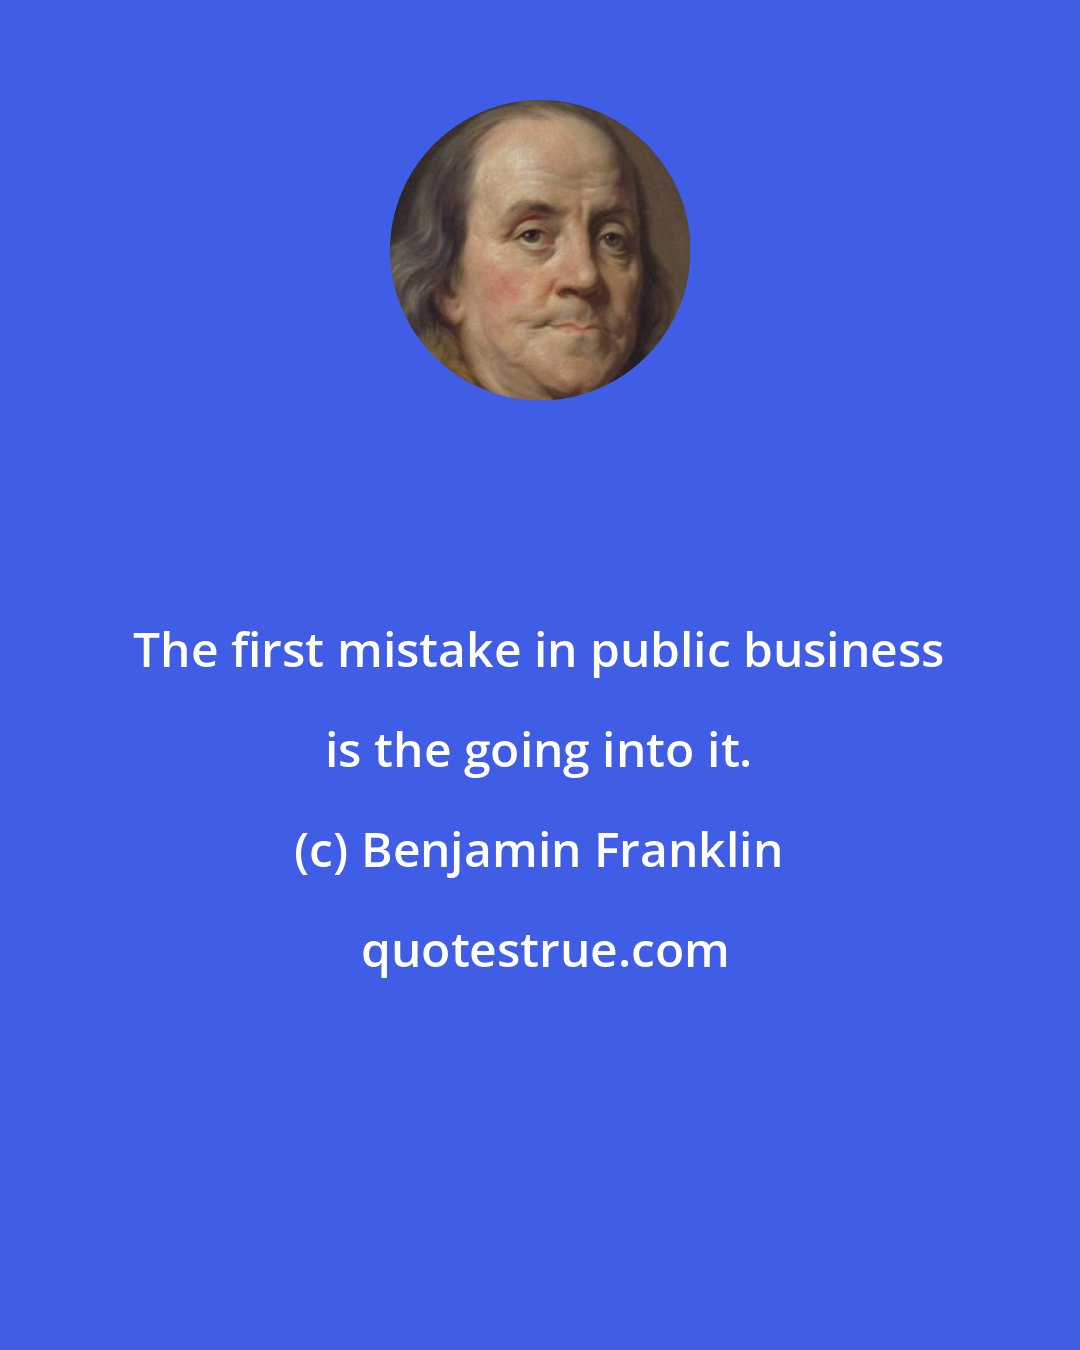 Benjamin Franklin: The first mistake in public business is the going into it.